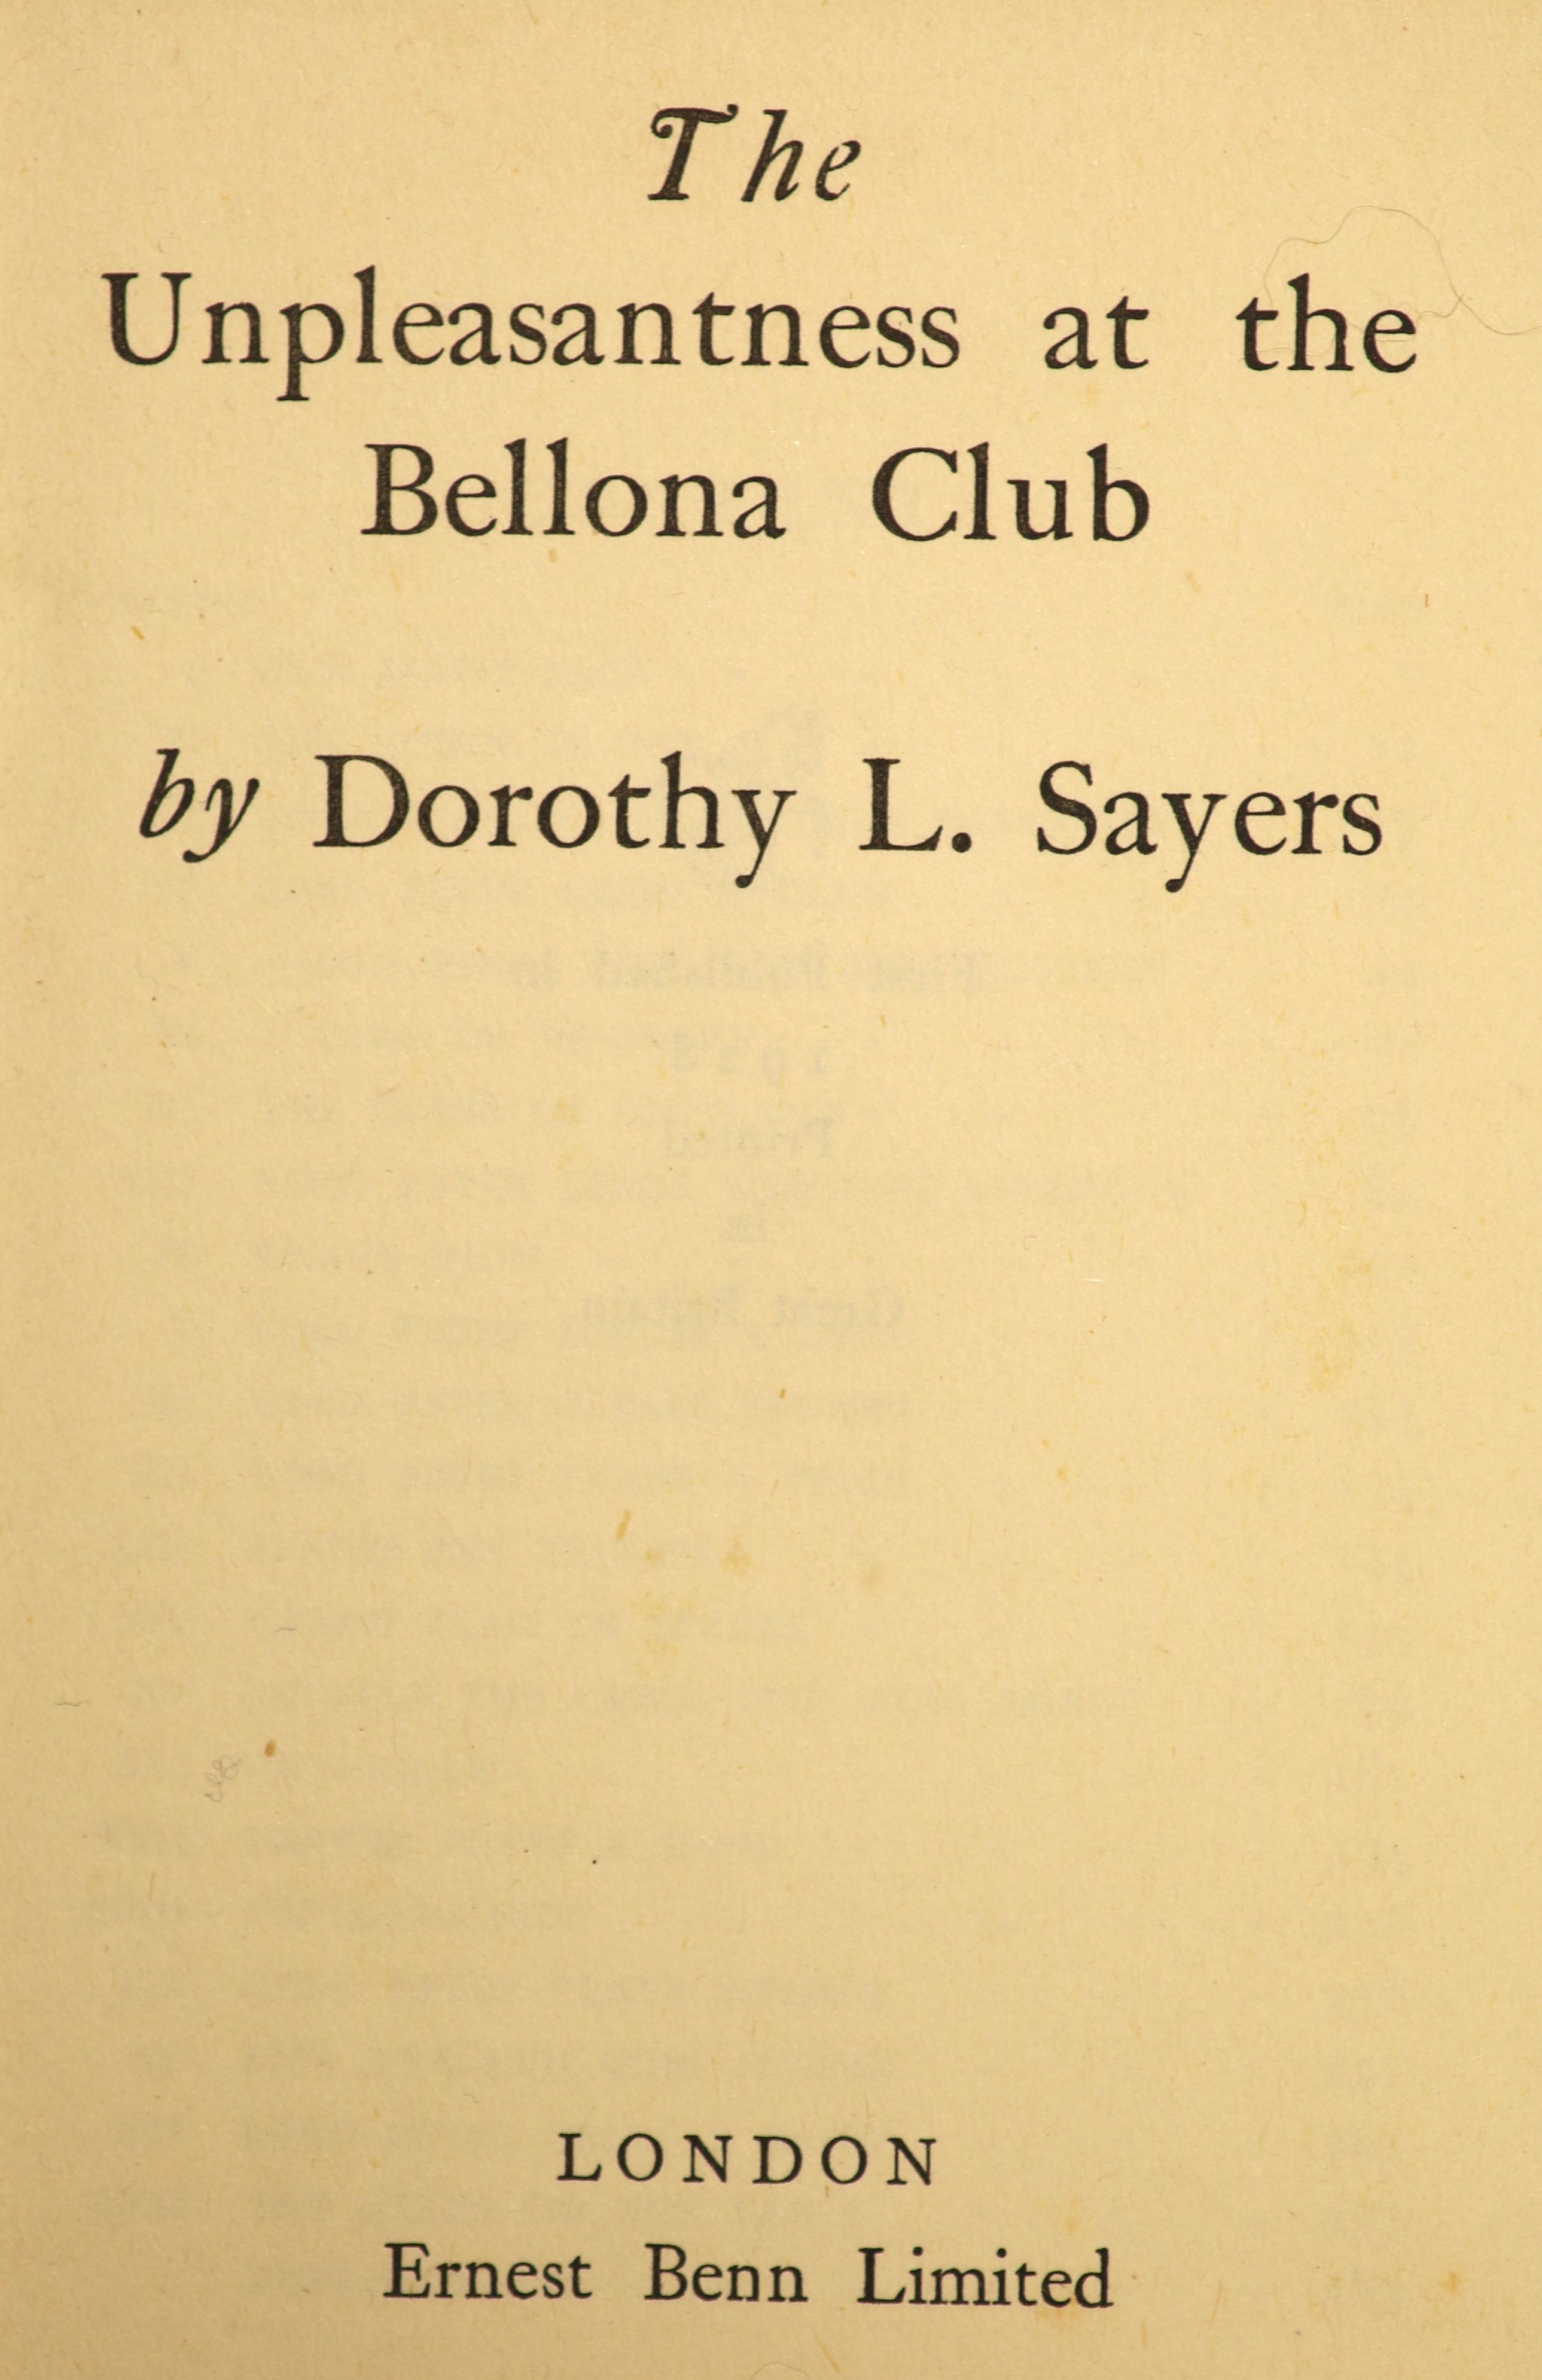 Sayers, Dorothy L. - 4 works - The Unpleasantness at the Bellona Club, 2 copies, 1st editions, original black cloth with orange lettering, both with split joints, one copy with detached half title, Ernest Benn, London, 1